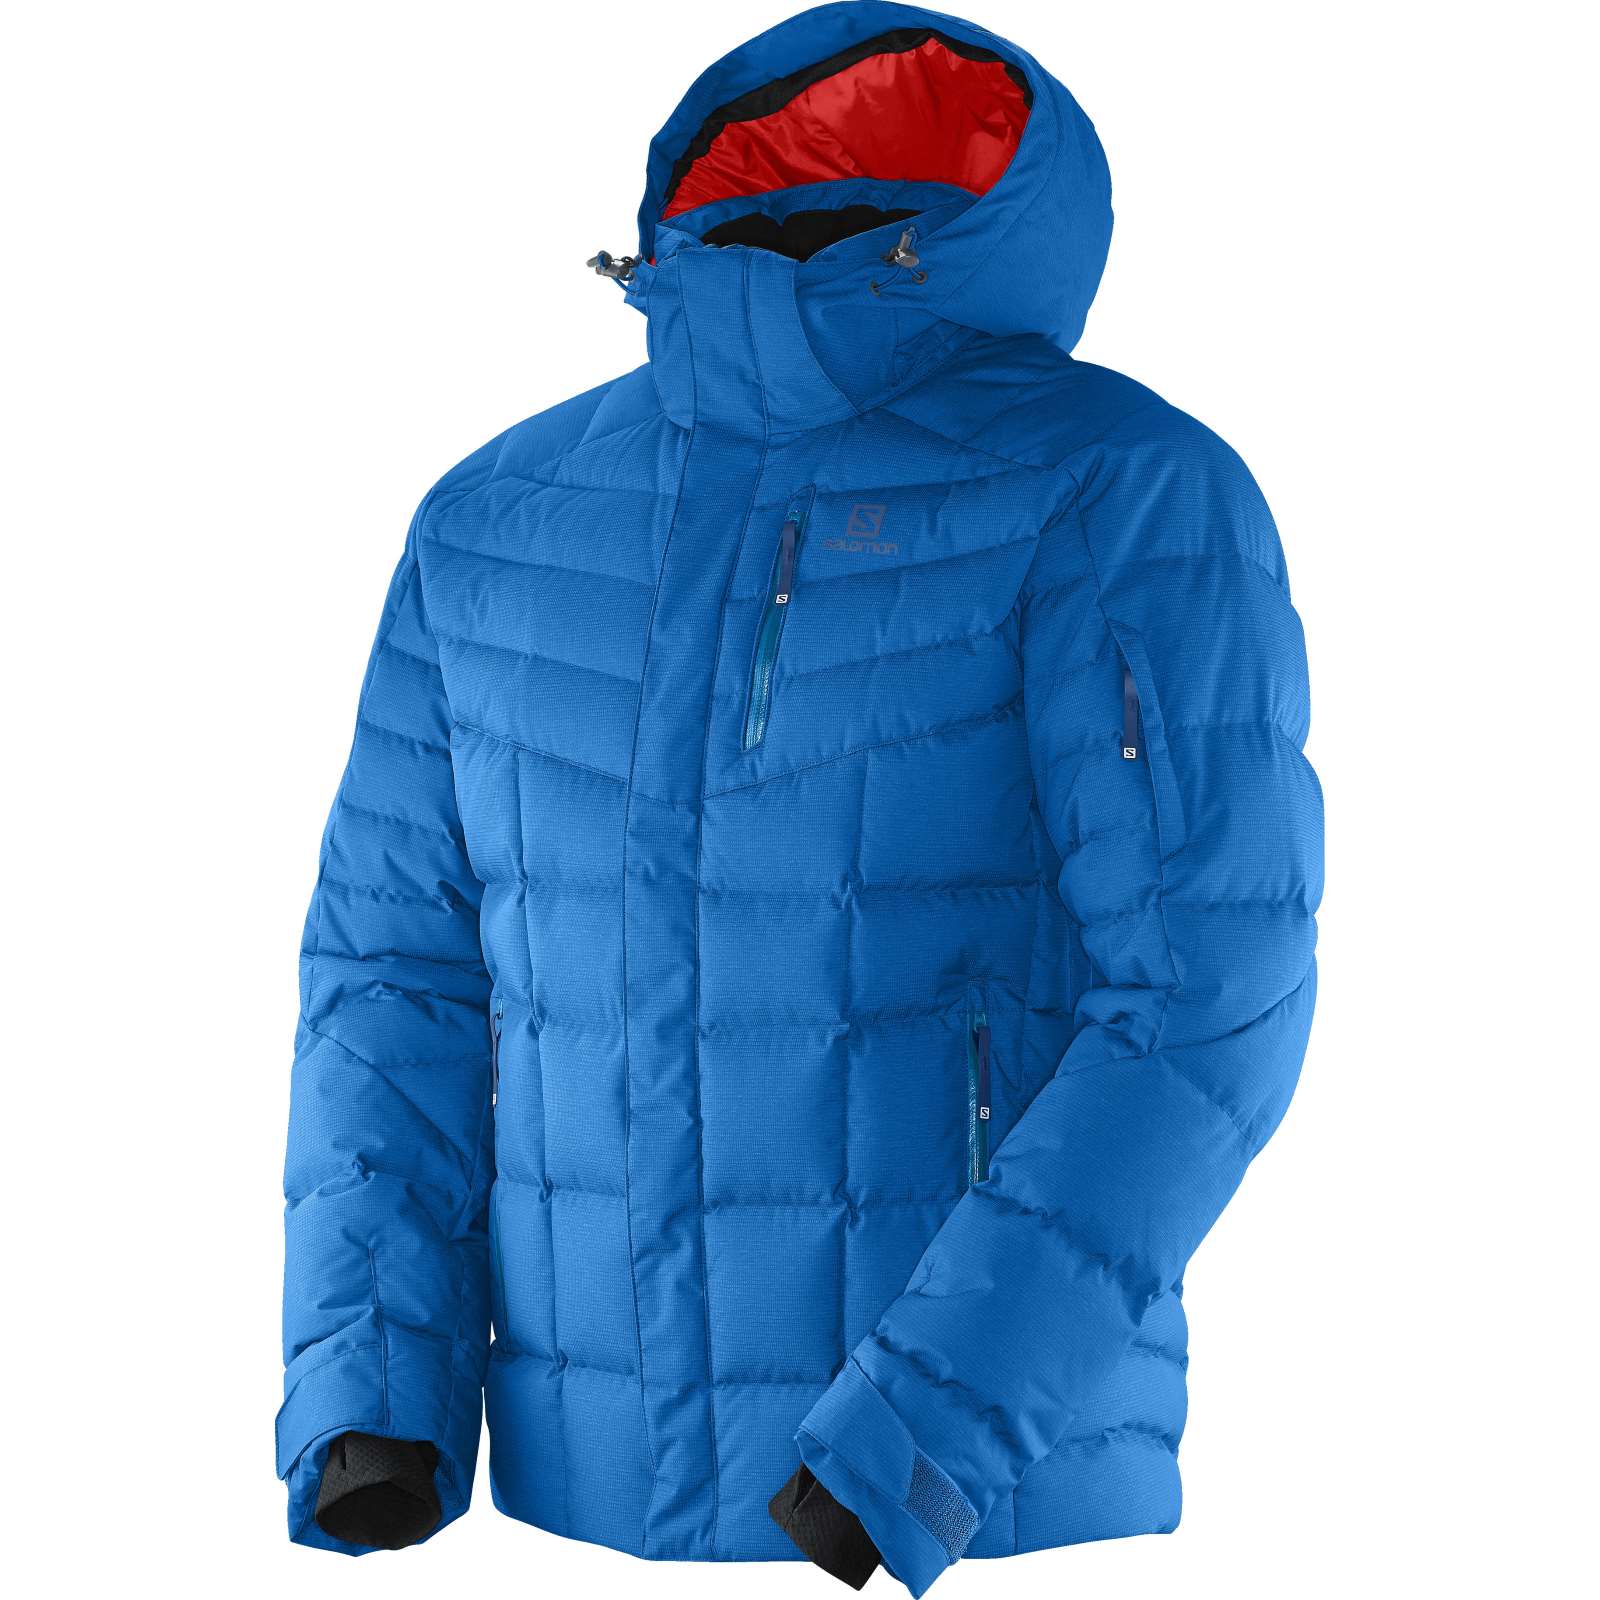 Icetown Jacket Men's Outnorth